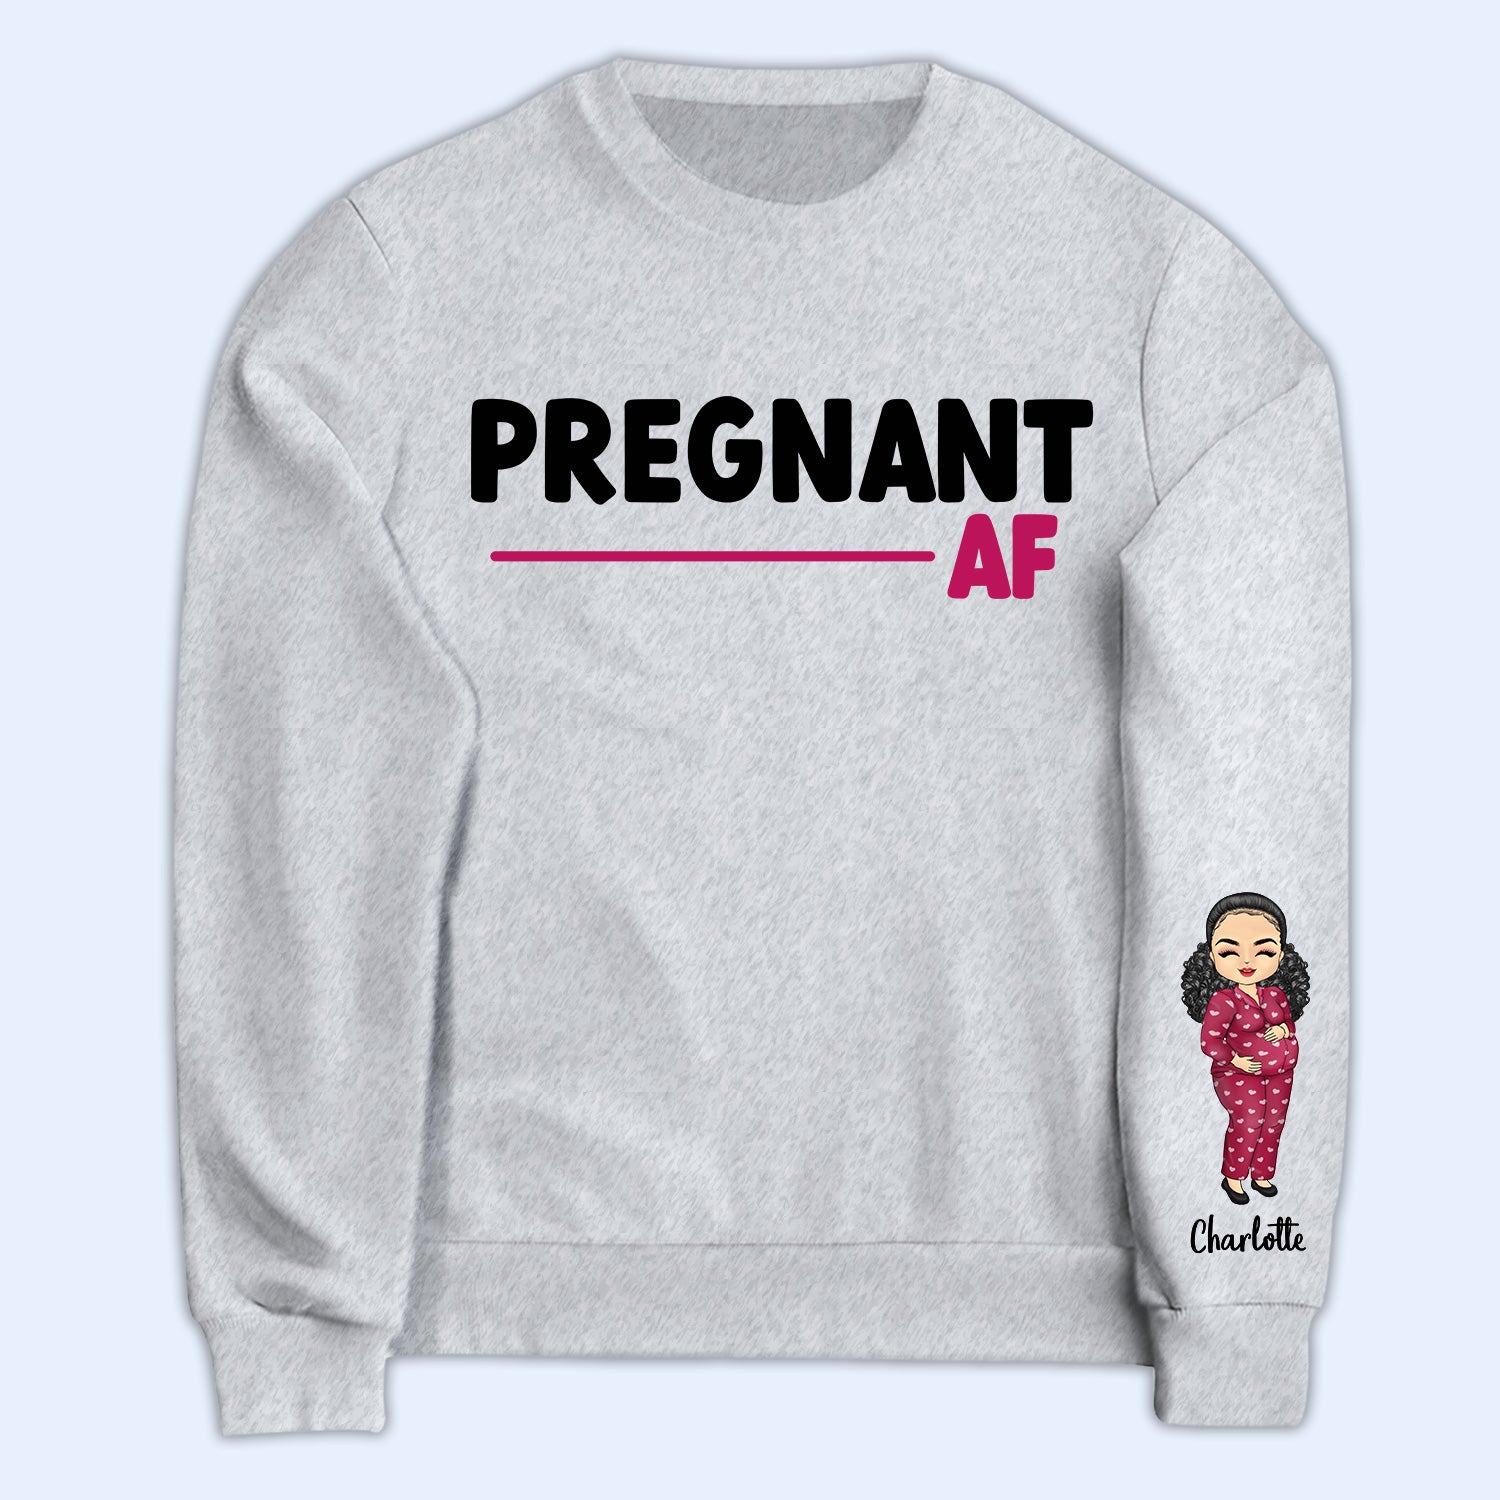 Pregnant Af - Gift For Mom-to-be - Personalized Sweatshirt With Sleeve Imprint